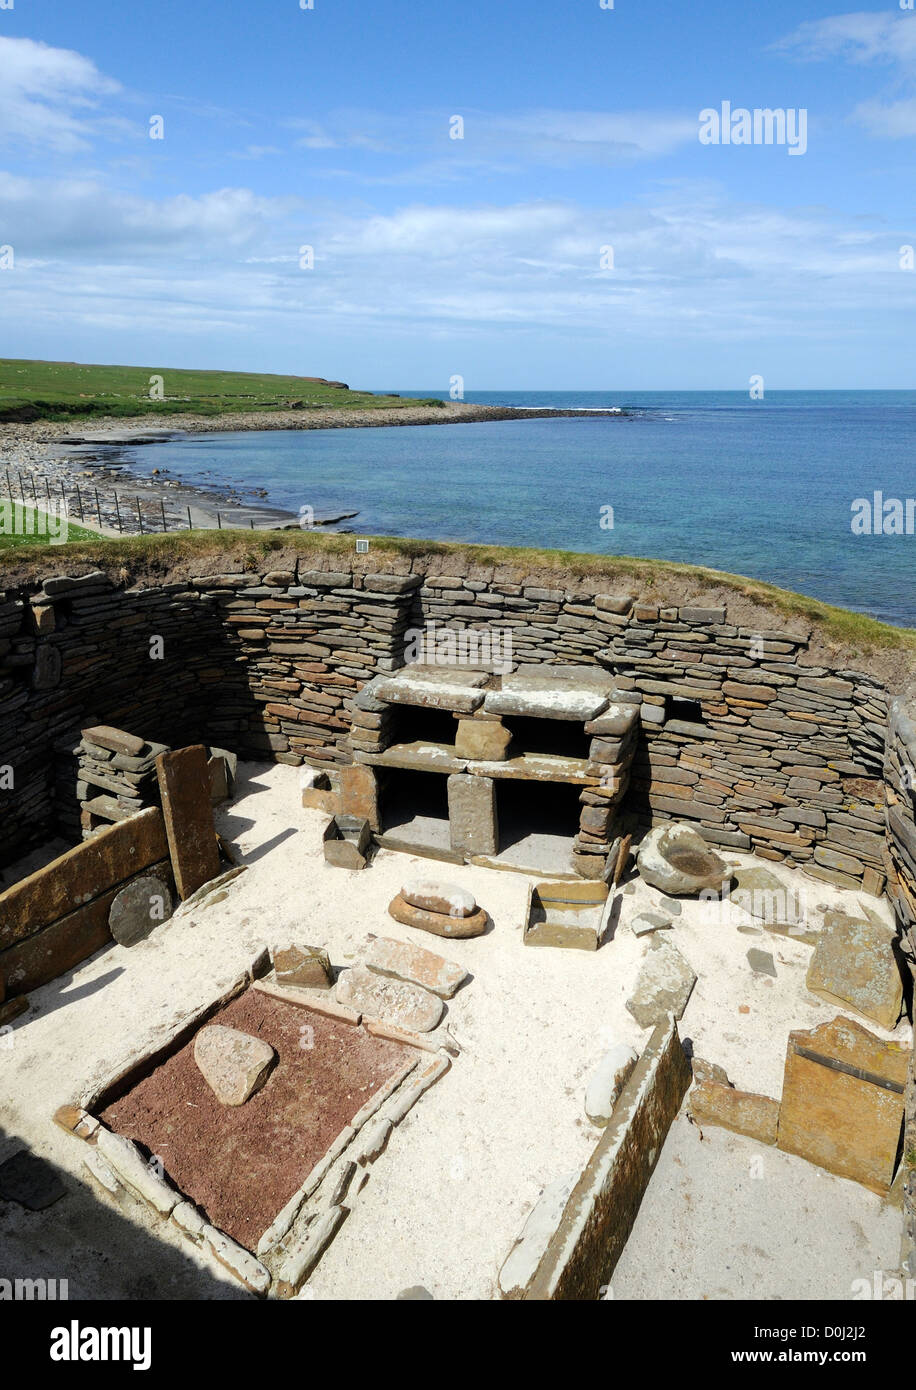 The interior of a four or five thousand year old neolithic house at Skara Brae showing shelves, fireplace and beds. Stock Photo